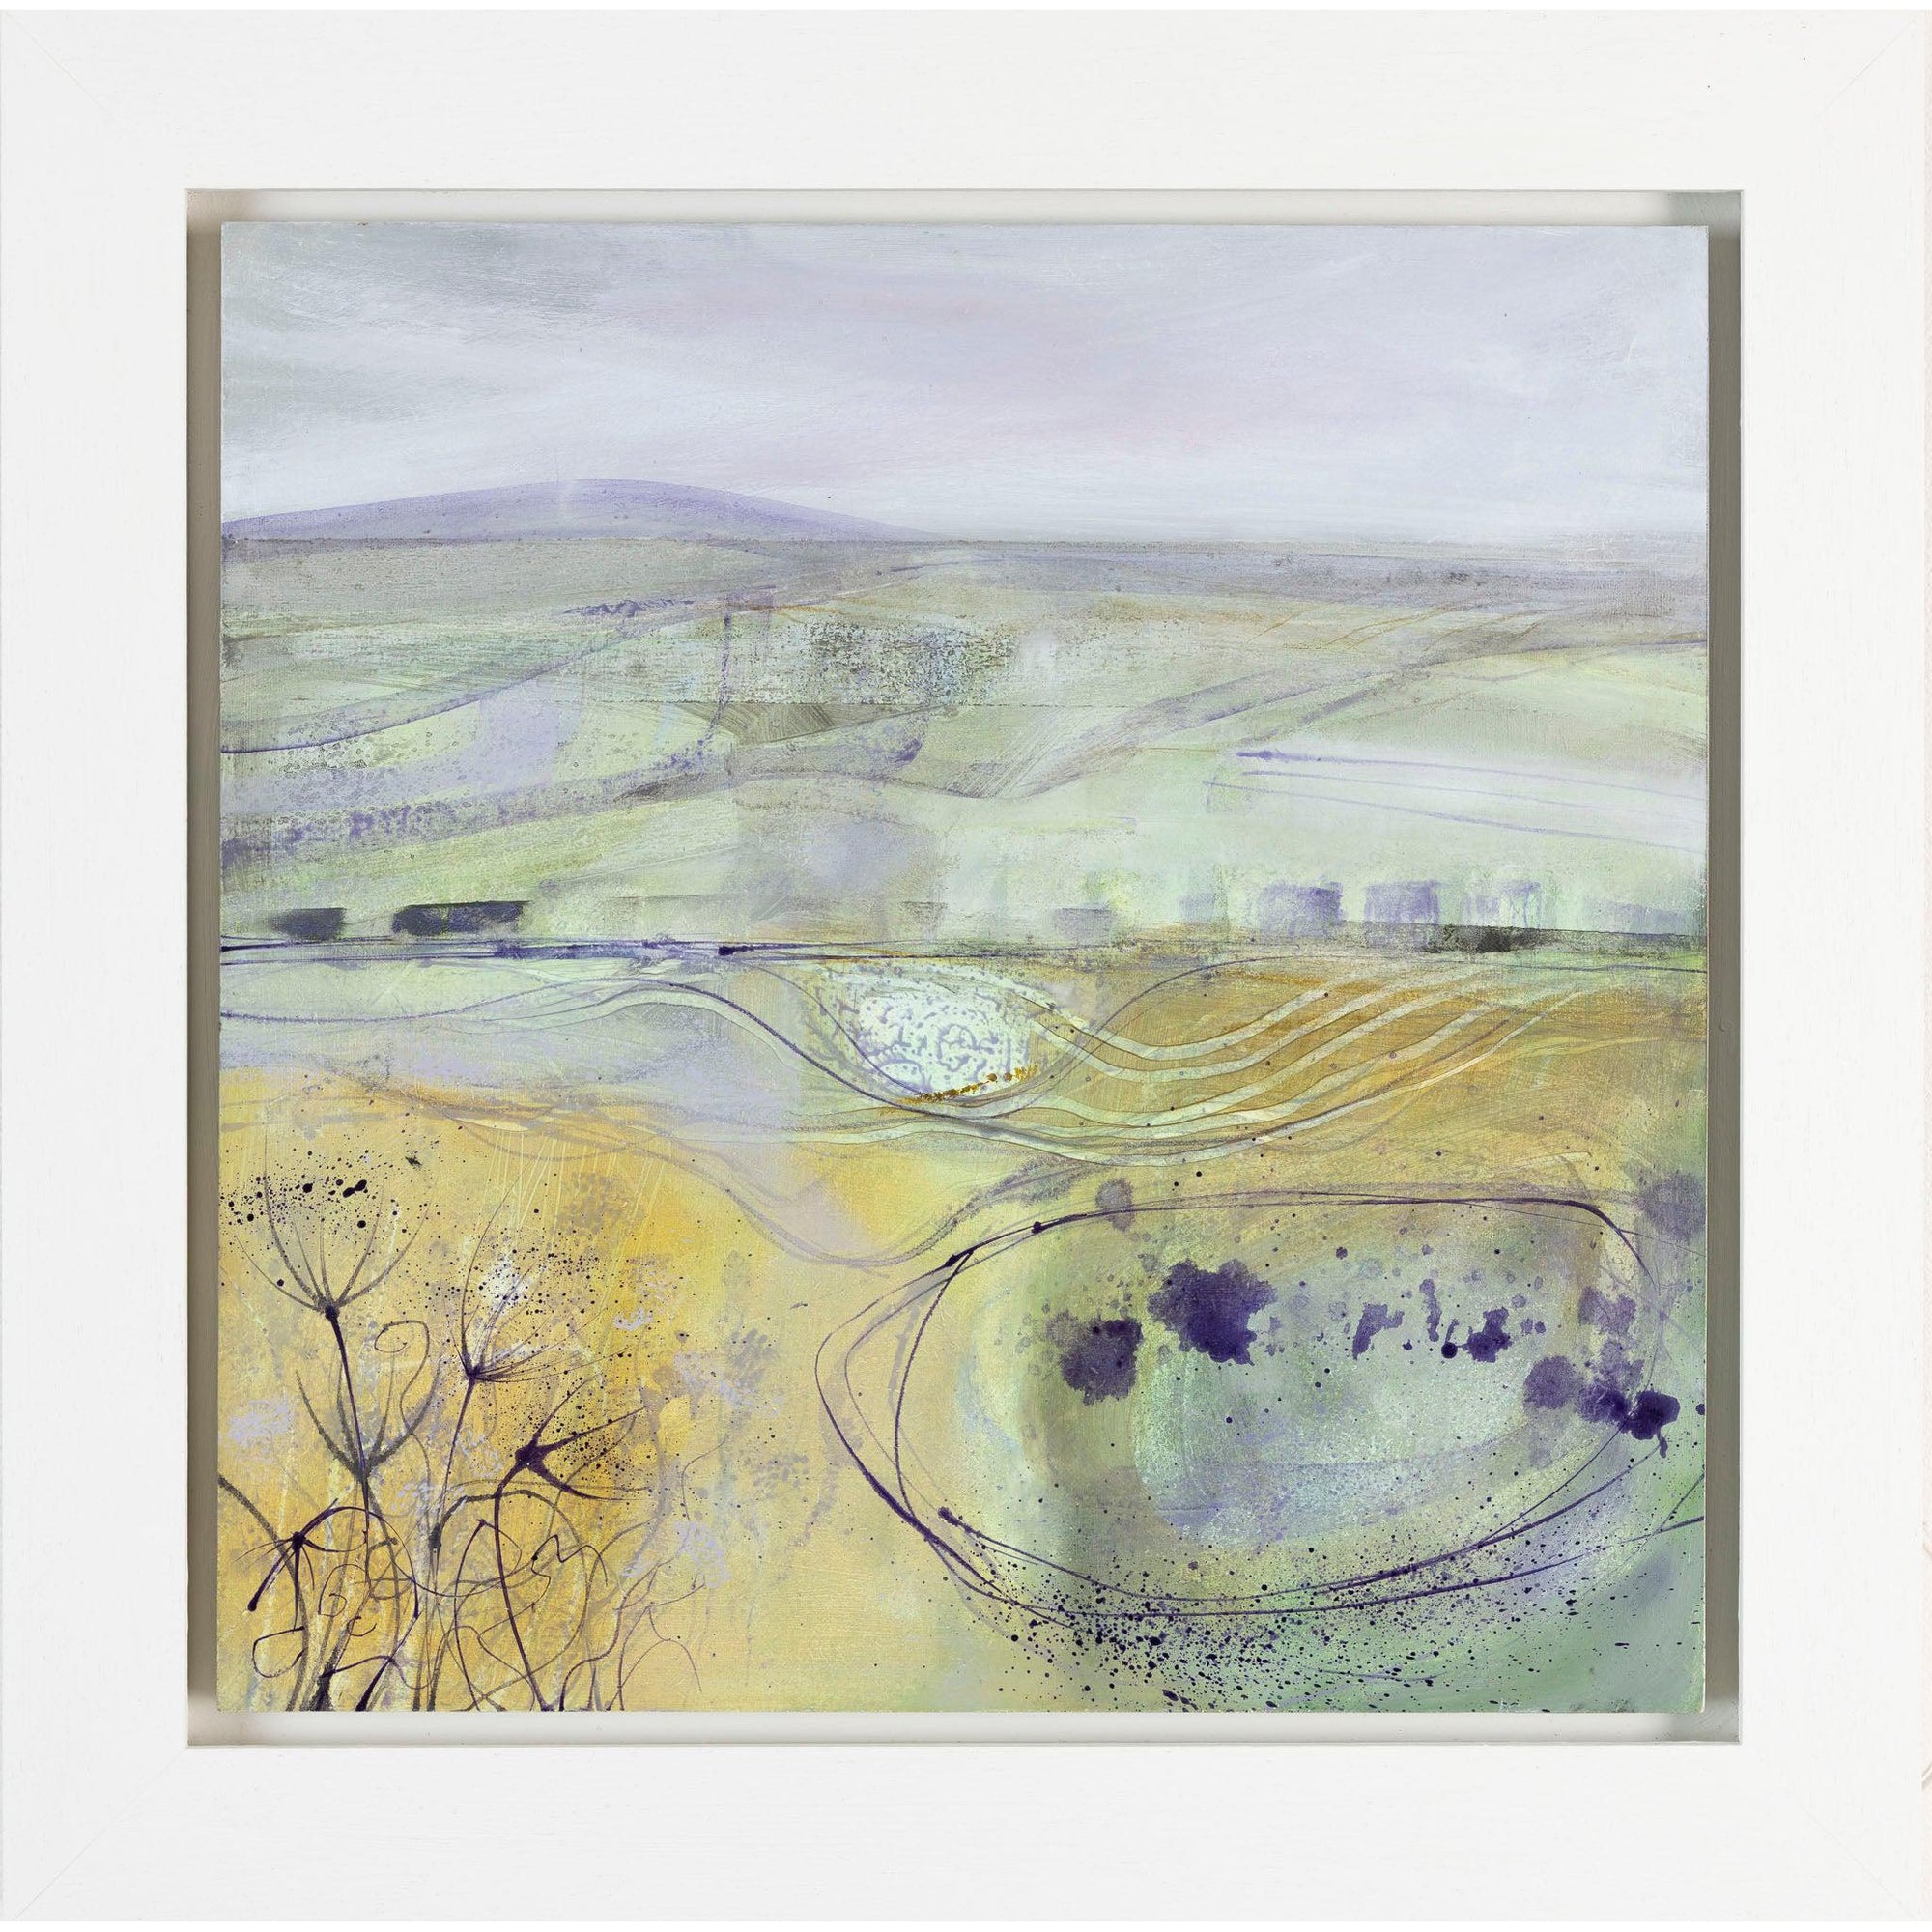 All the Scented Air, oil on board, by Ruth Taylor, available at Padstow Gallery, Cornwall